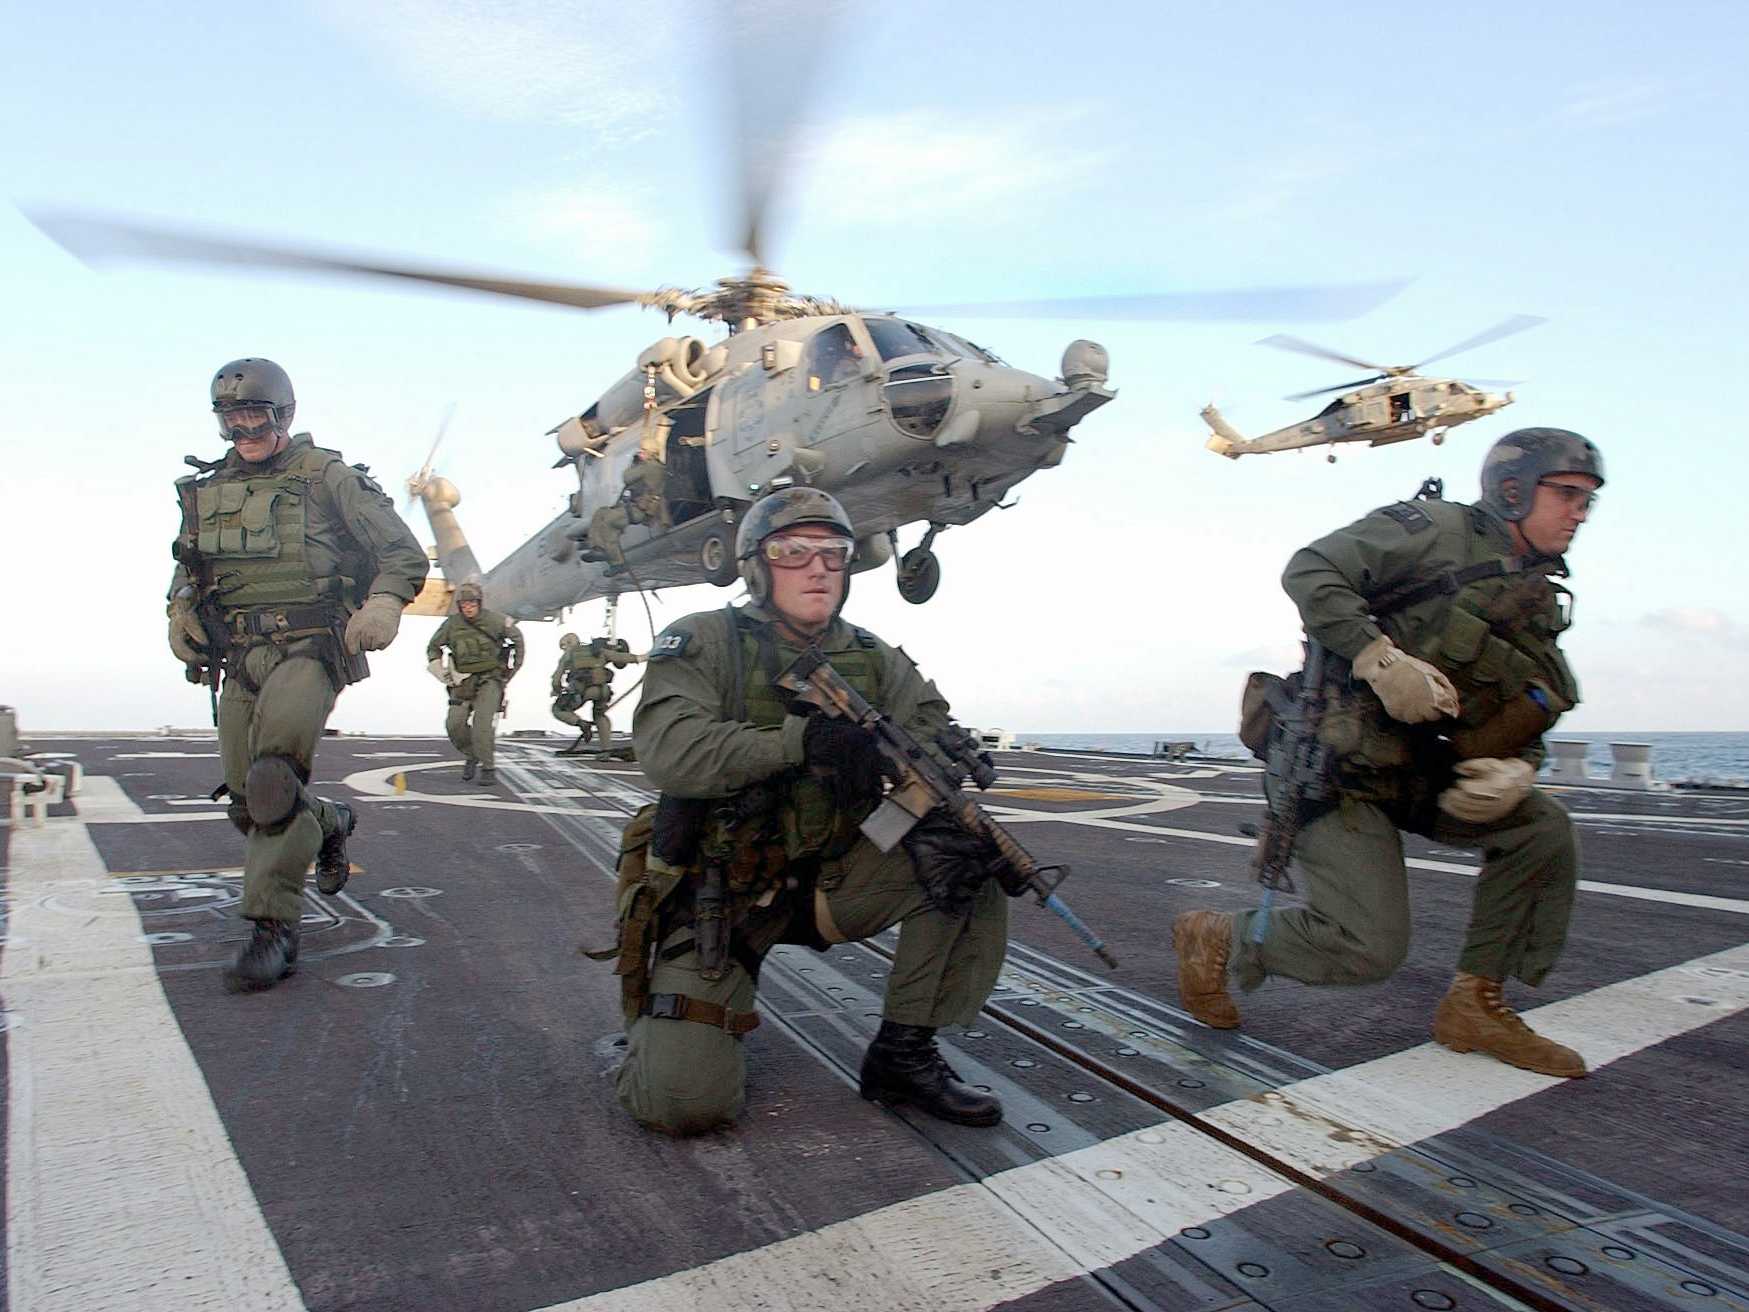  wwwbusinessinsidercomnavy seals seize a ship in just minutes 2014 3